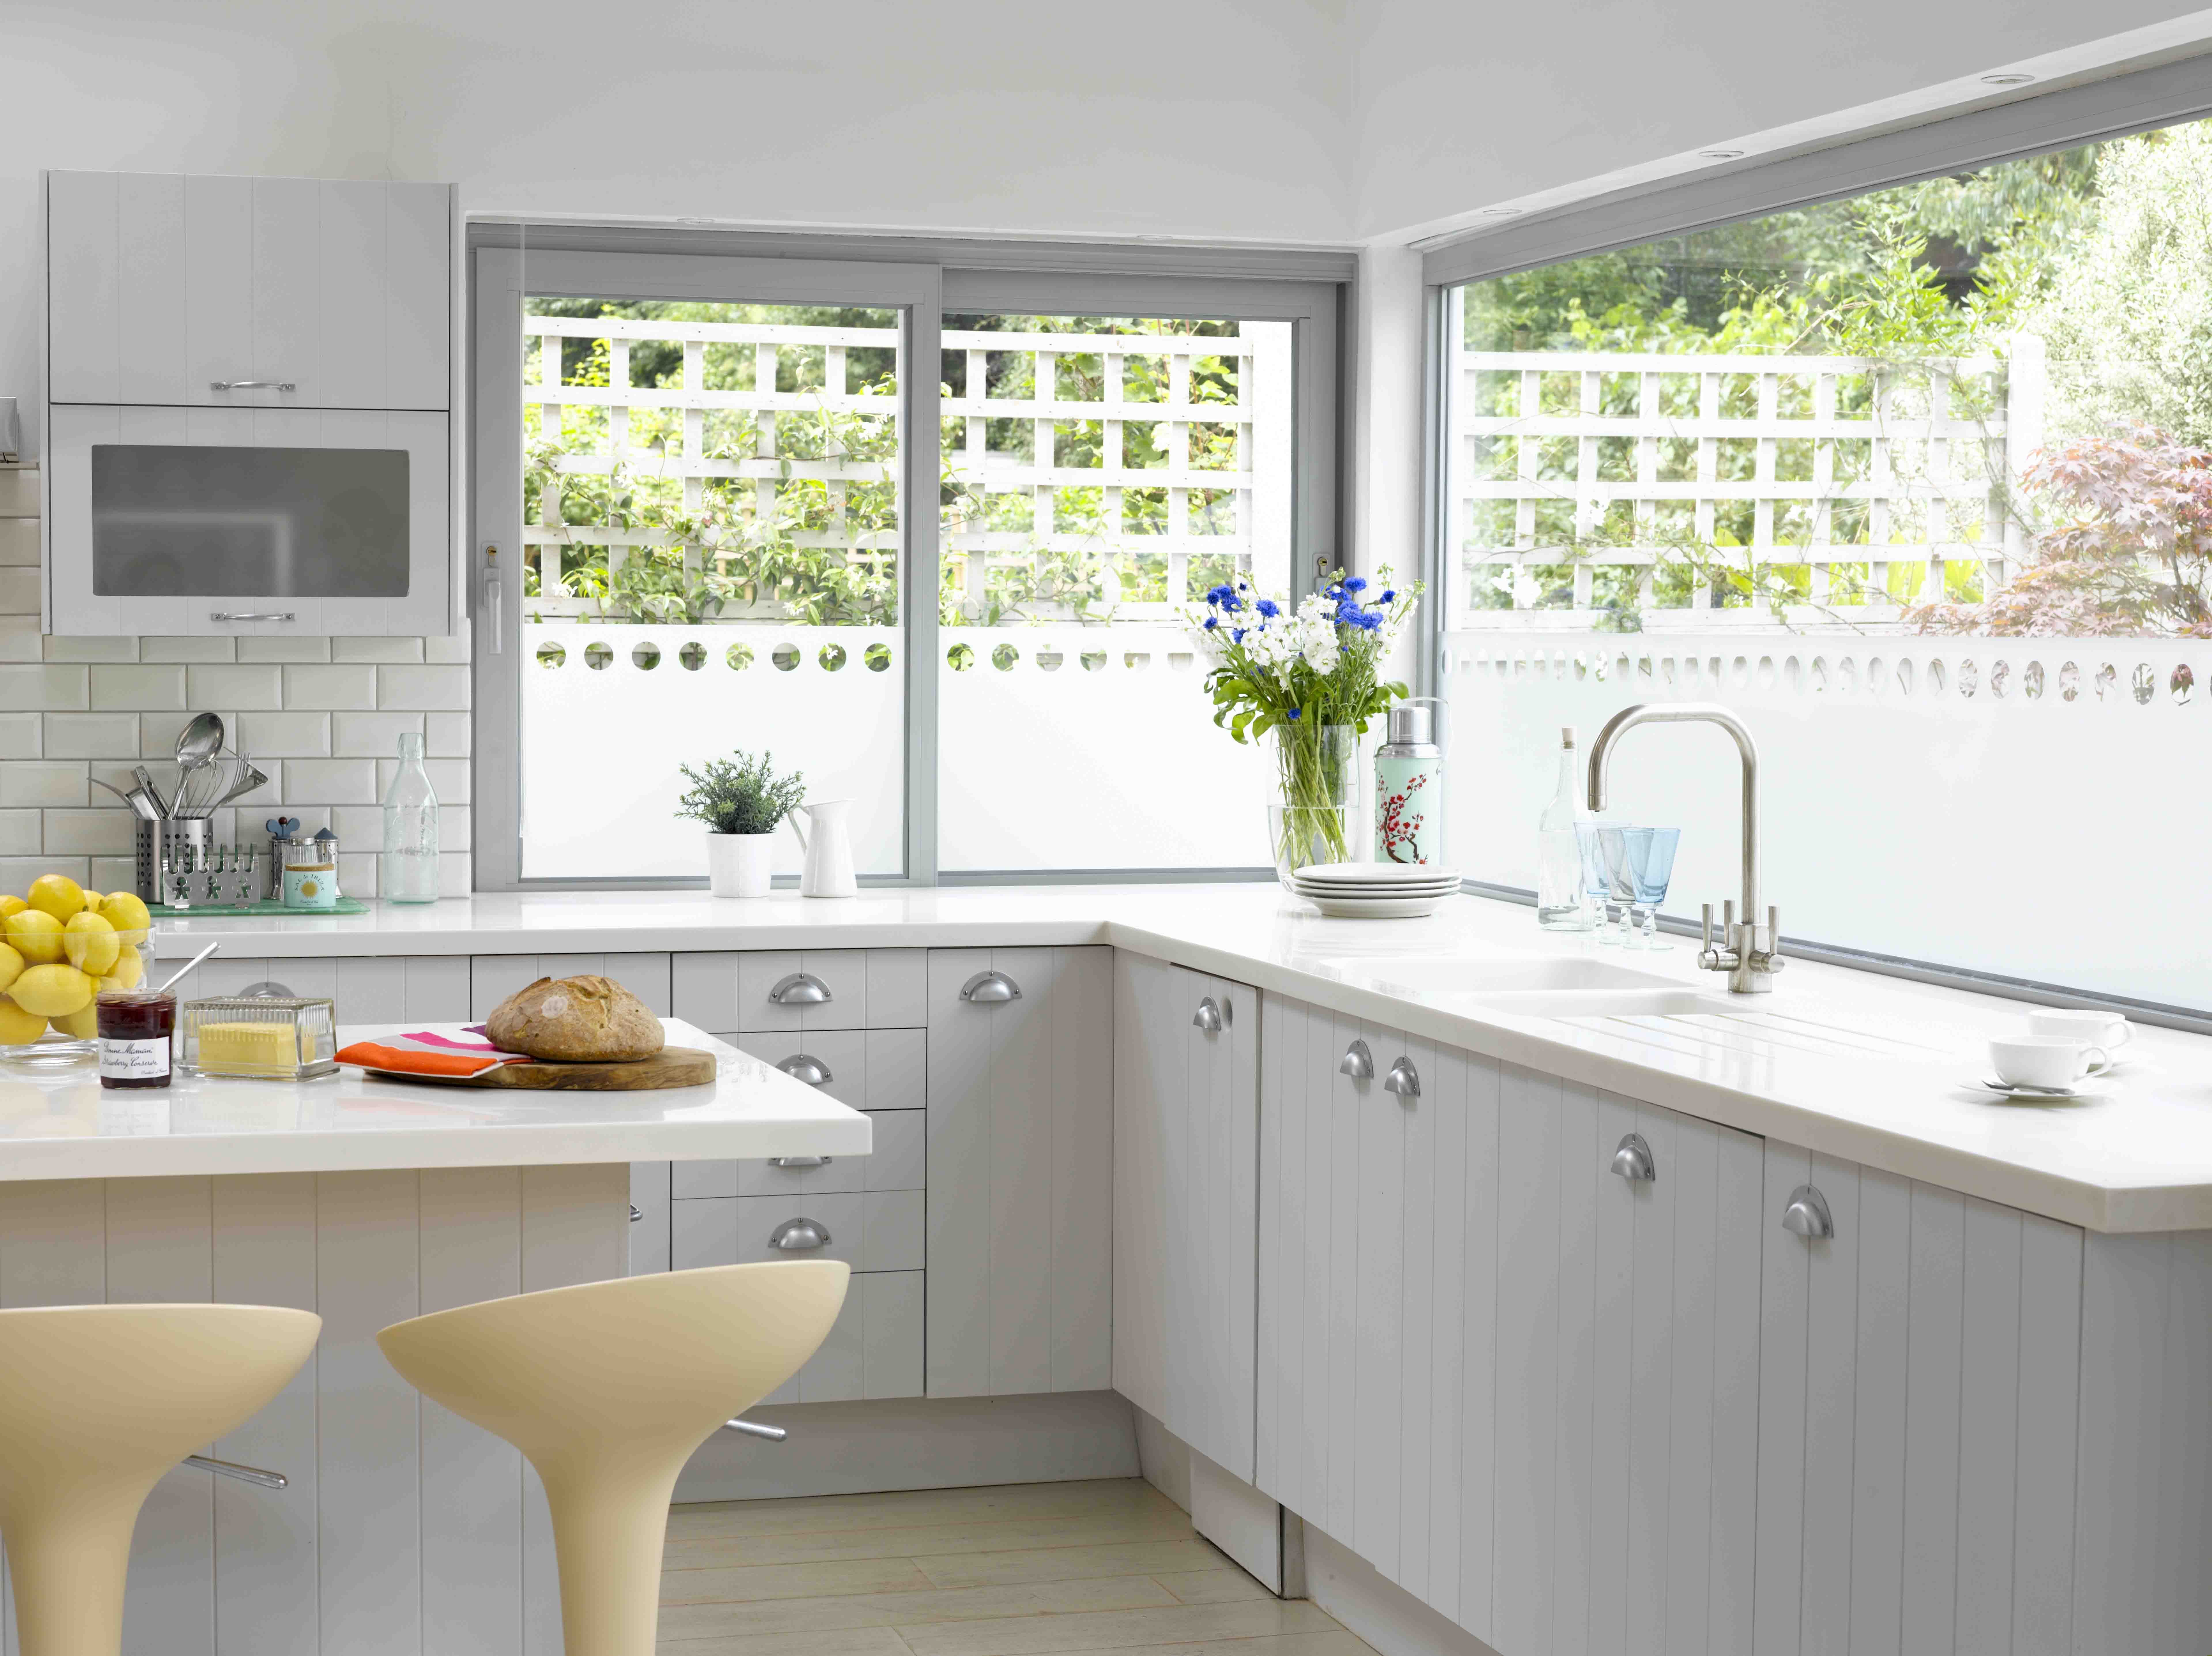 Choosing the right kitchen window treatments - Interior Design Explained